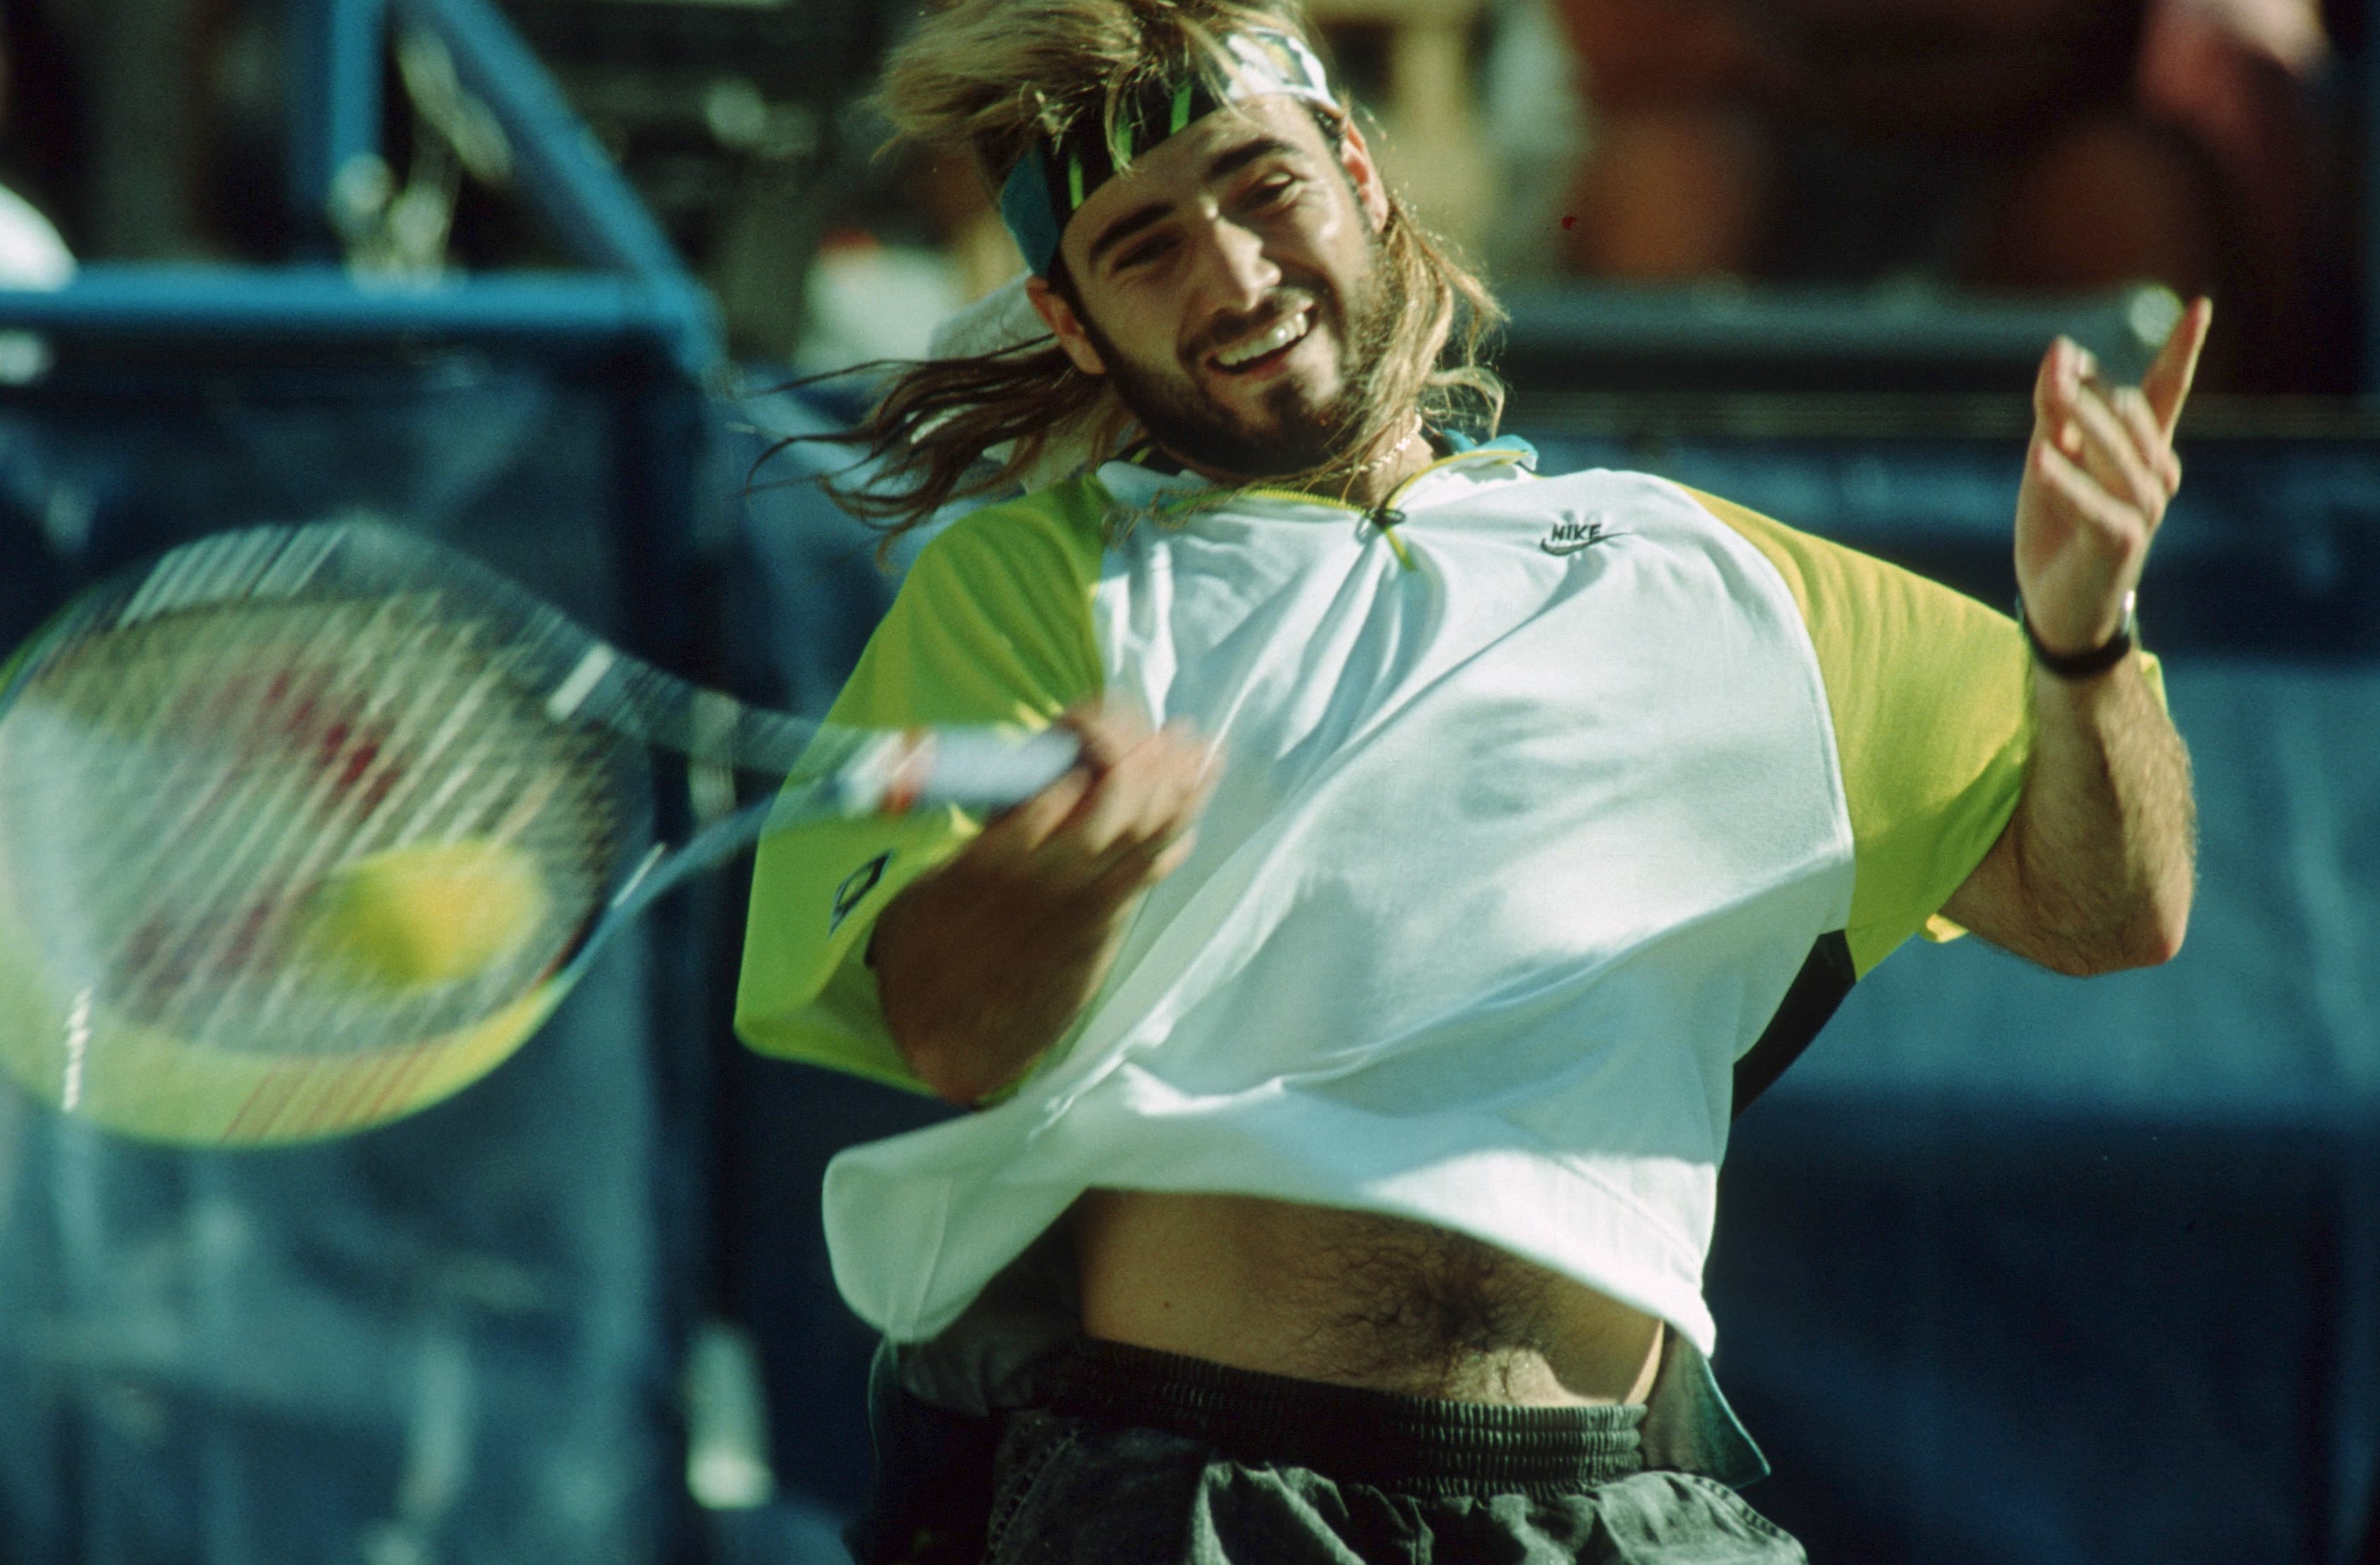 agassi jean shorts